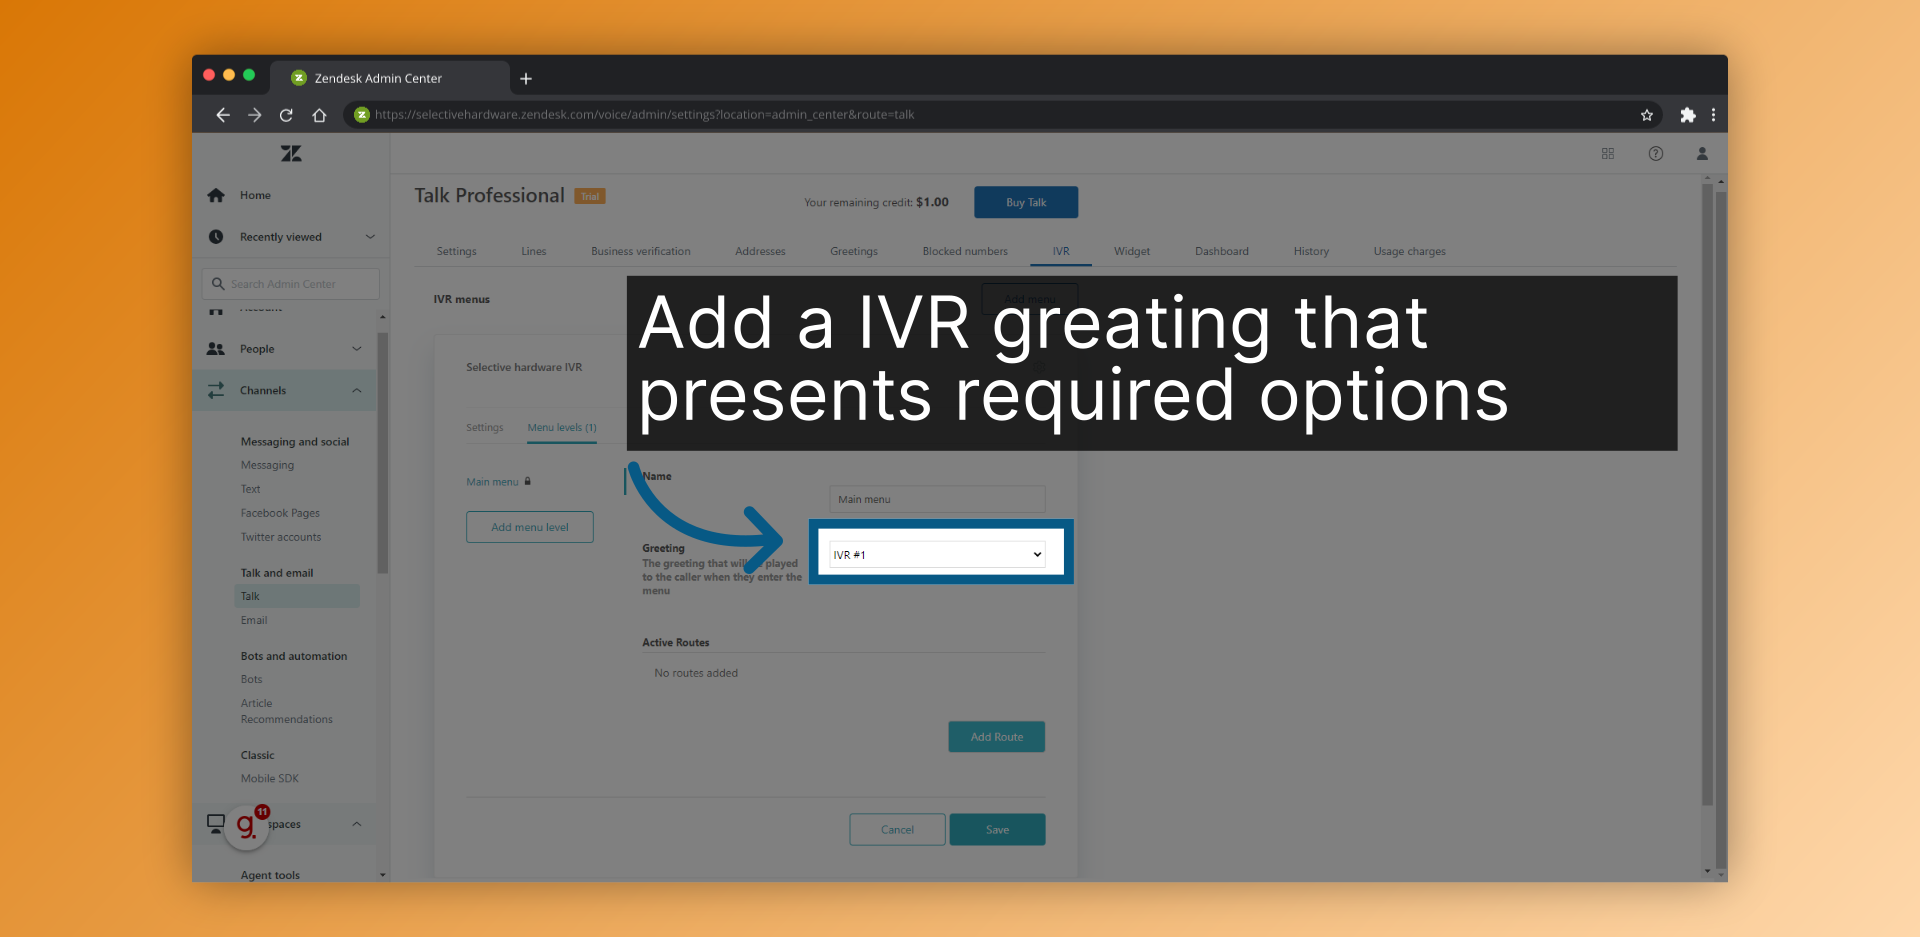 Add a IVR greating that presents required options